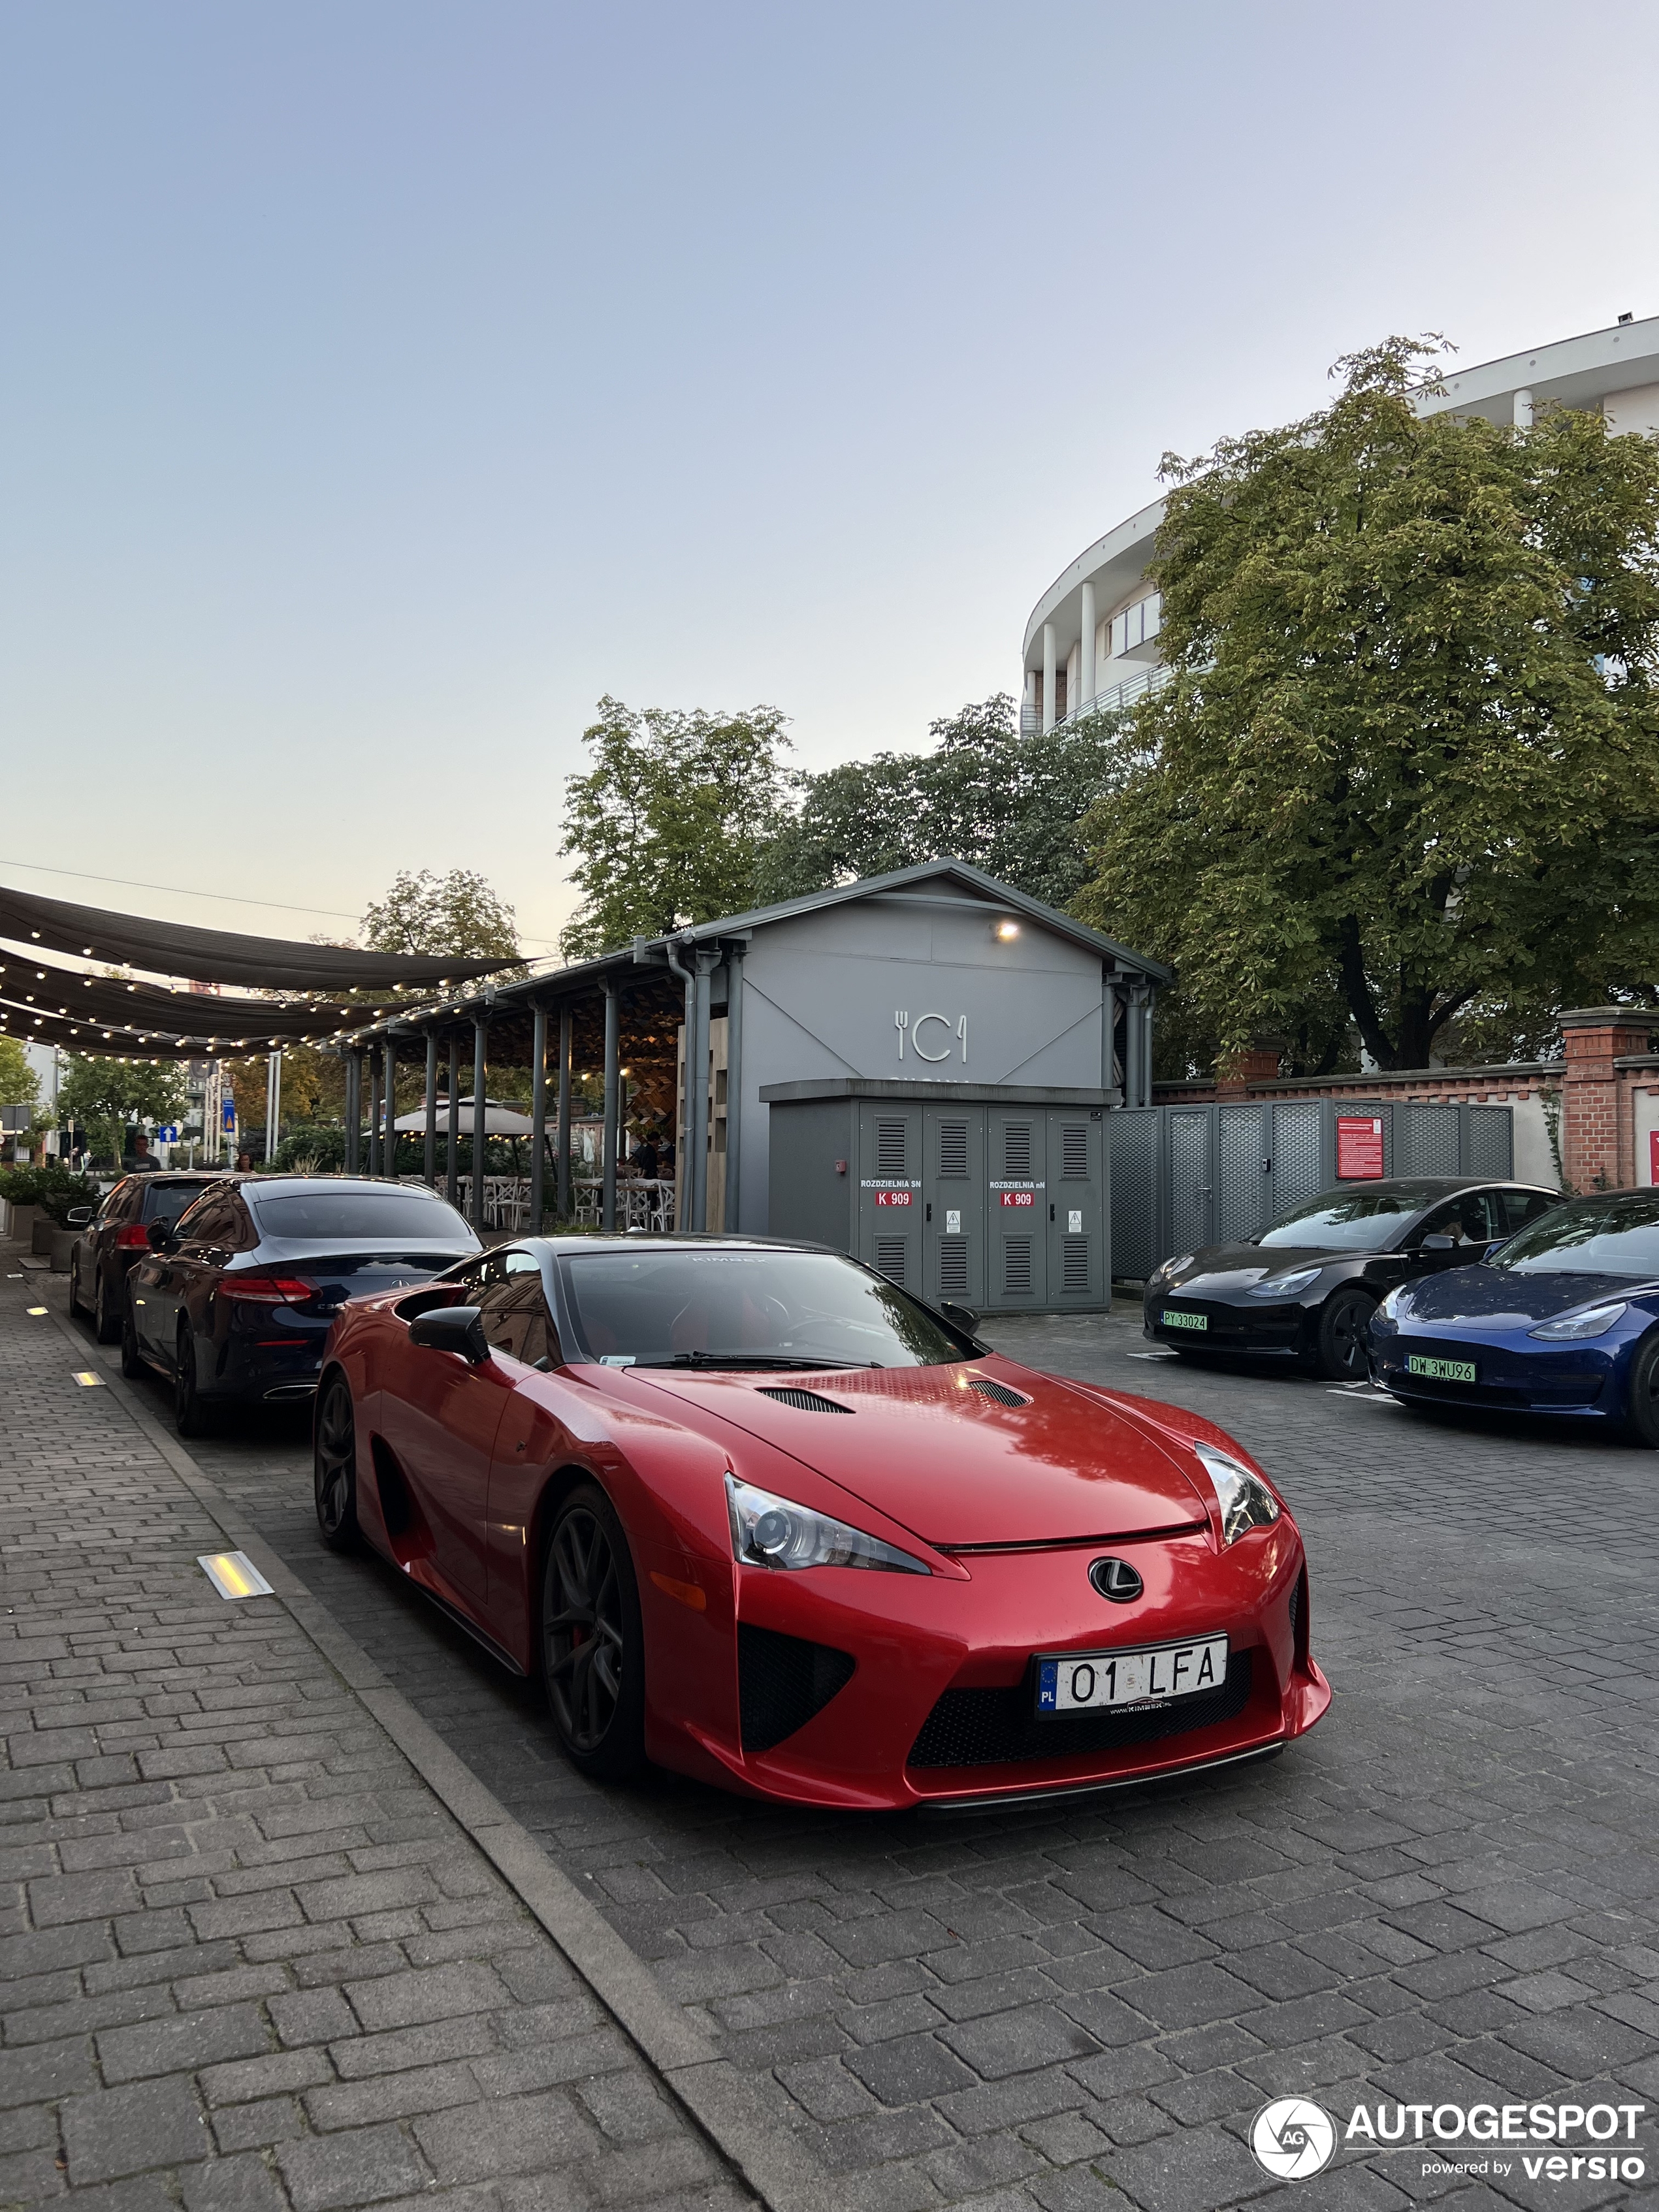 A red LFA shows up in Poznań